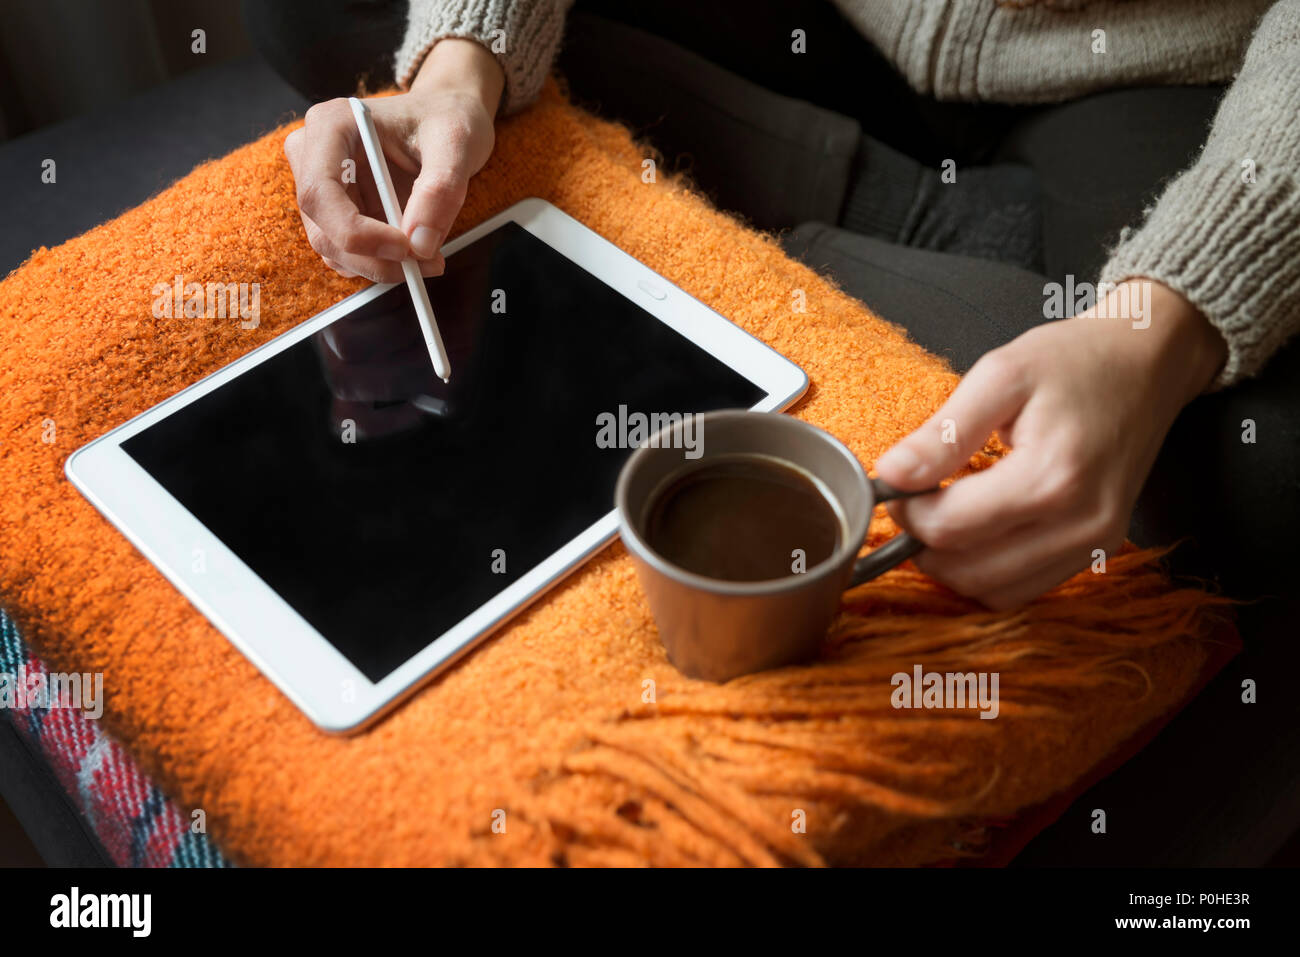 Woman Using Digital Tablet And Drinking Coffee At Home Stock Photo